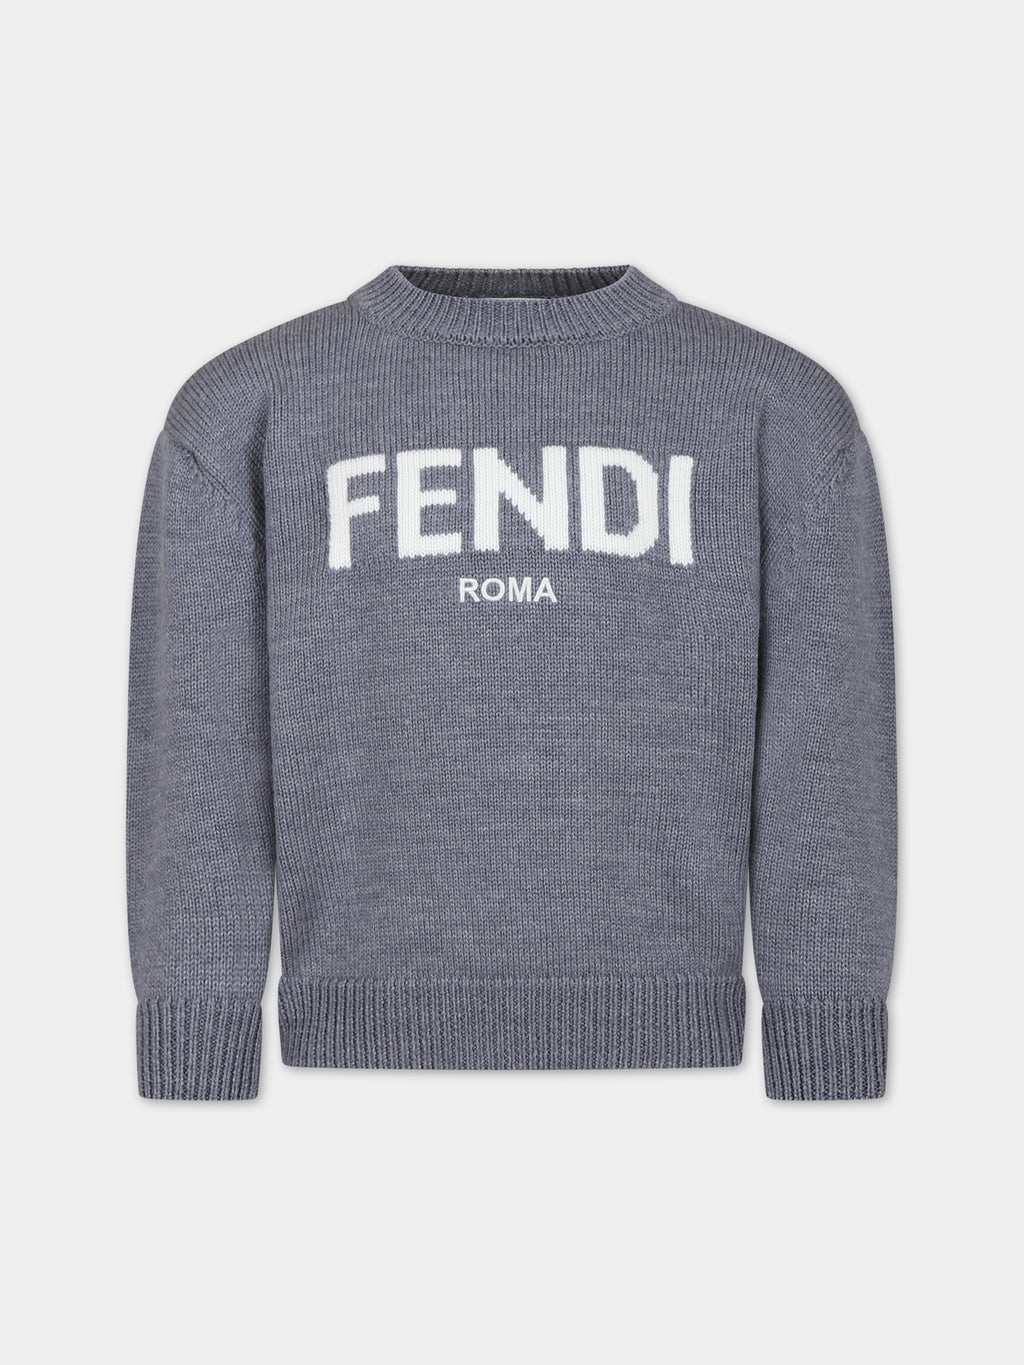 Grey sweater with logo for kids